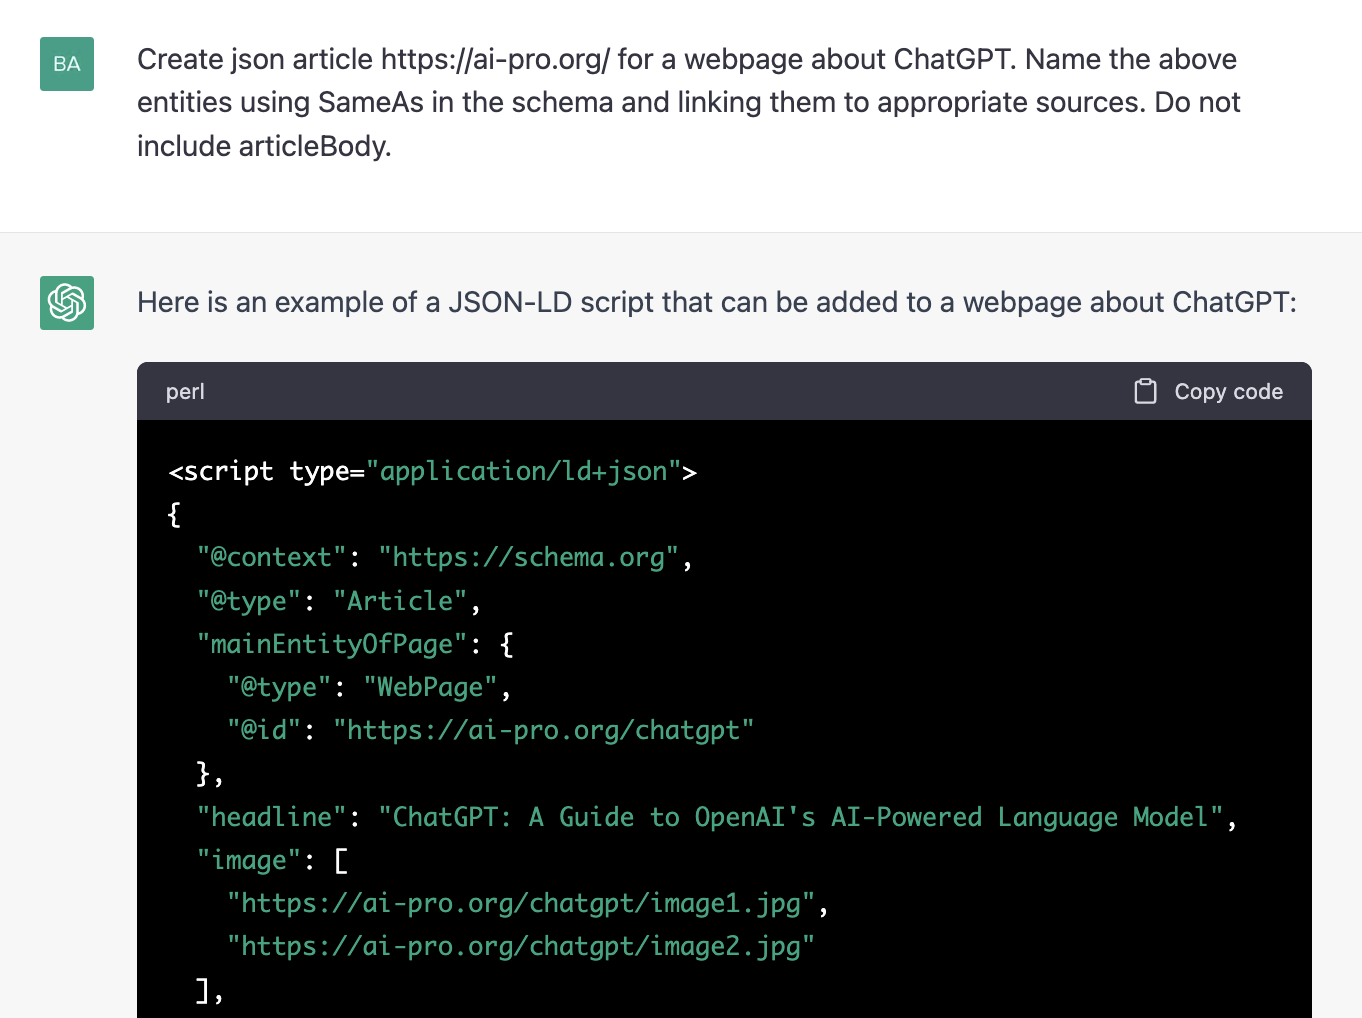 ChatGPT prompt about the example of a JSON-LD script that can be added to a webpage about chatGPT